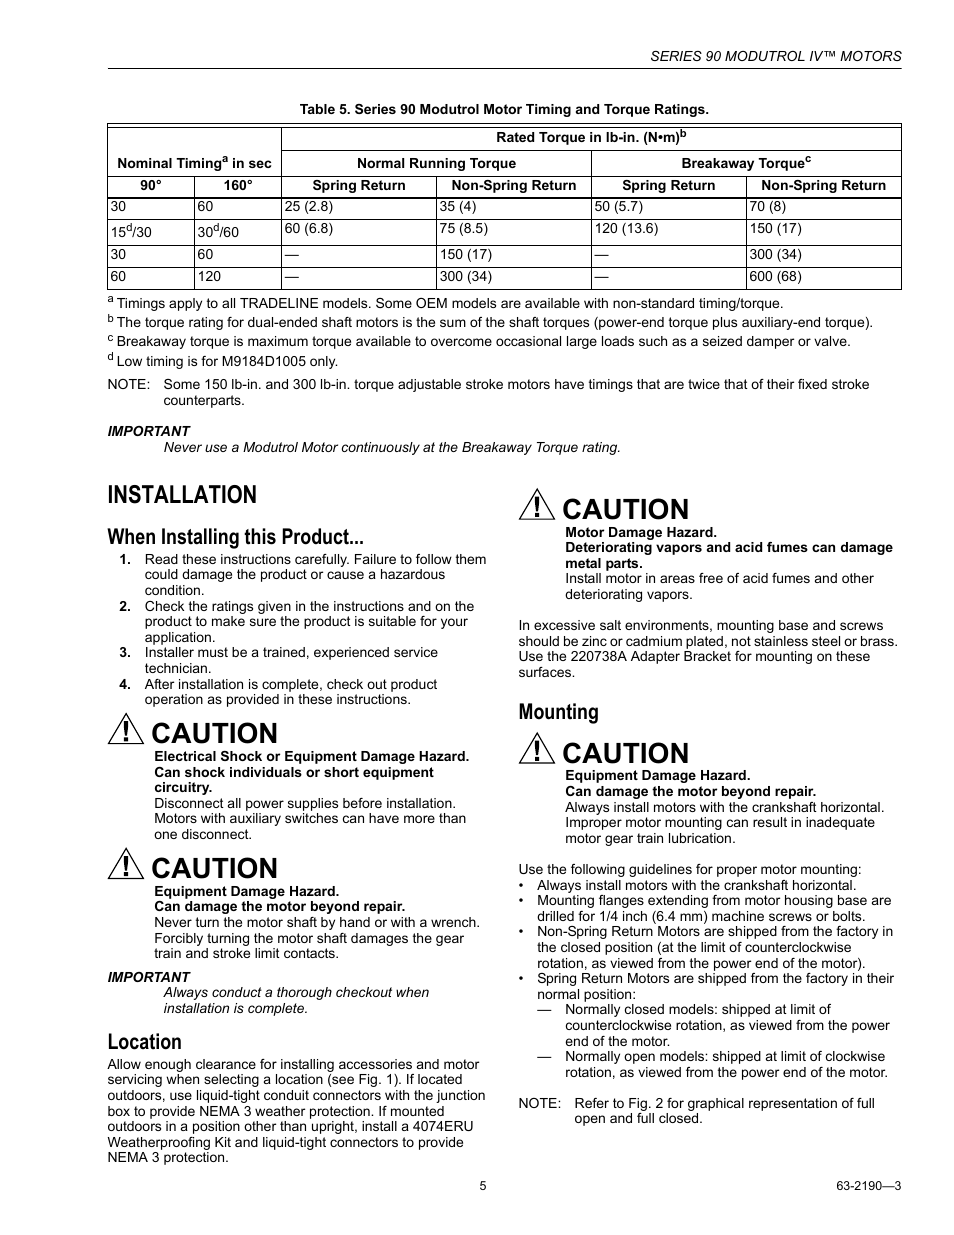 Installation, When installing this product, Location | Mounting, Caution | Honeywell Modutrol IV Motors Series 90 User Manual | Page 5 / 12